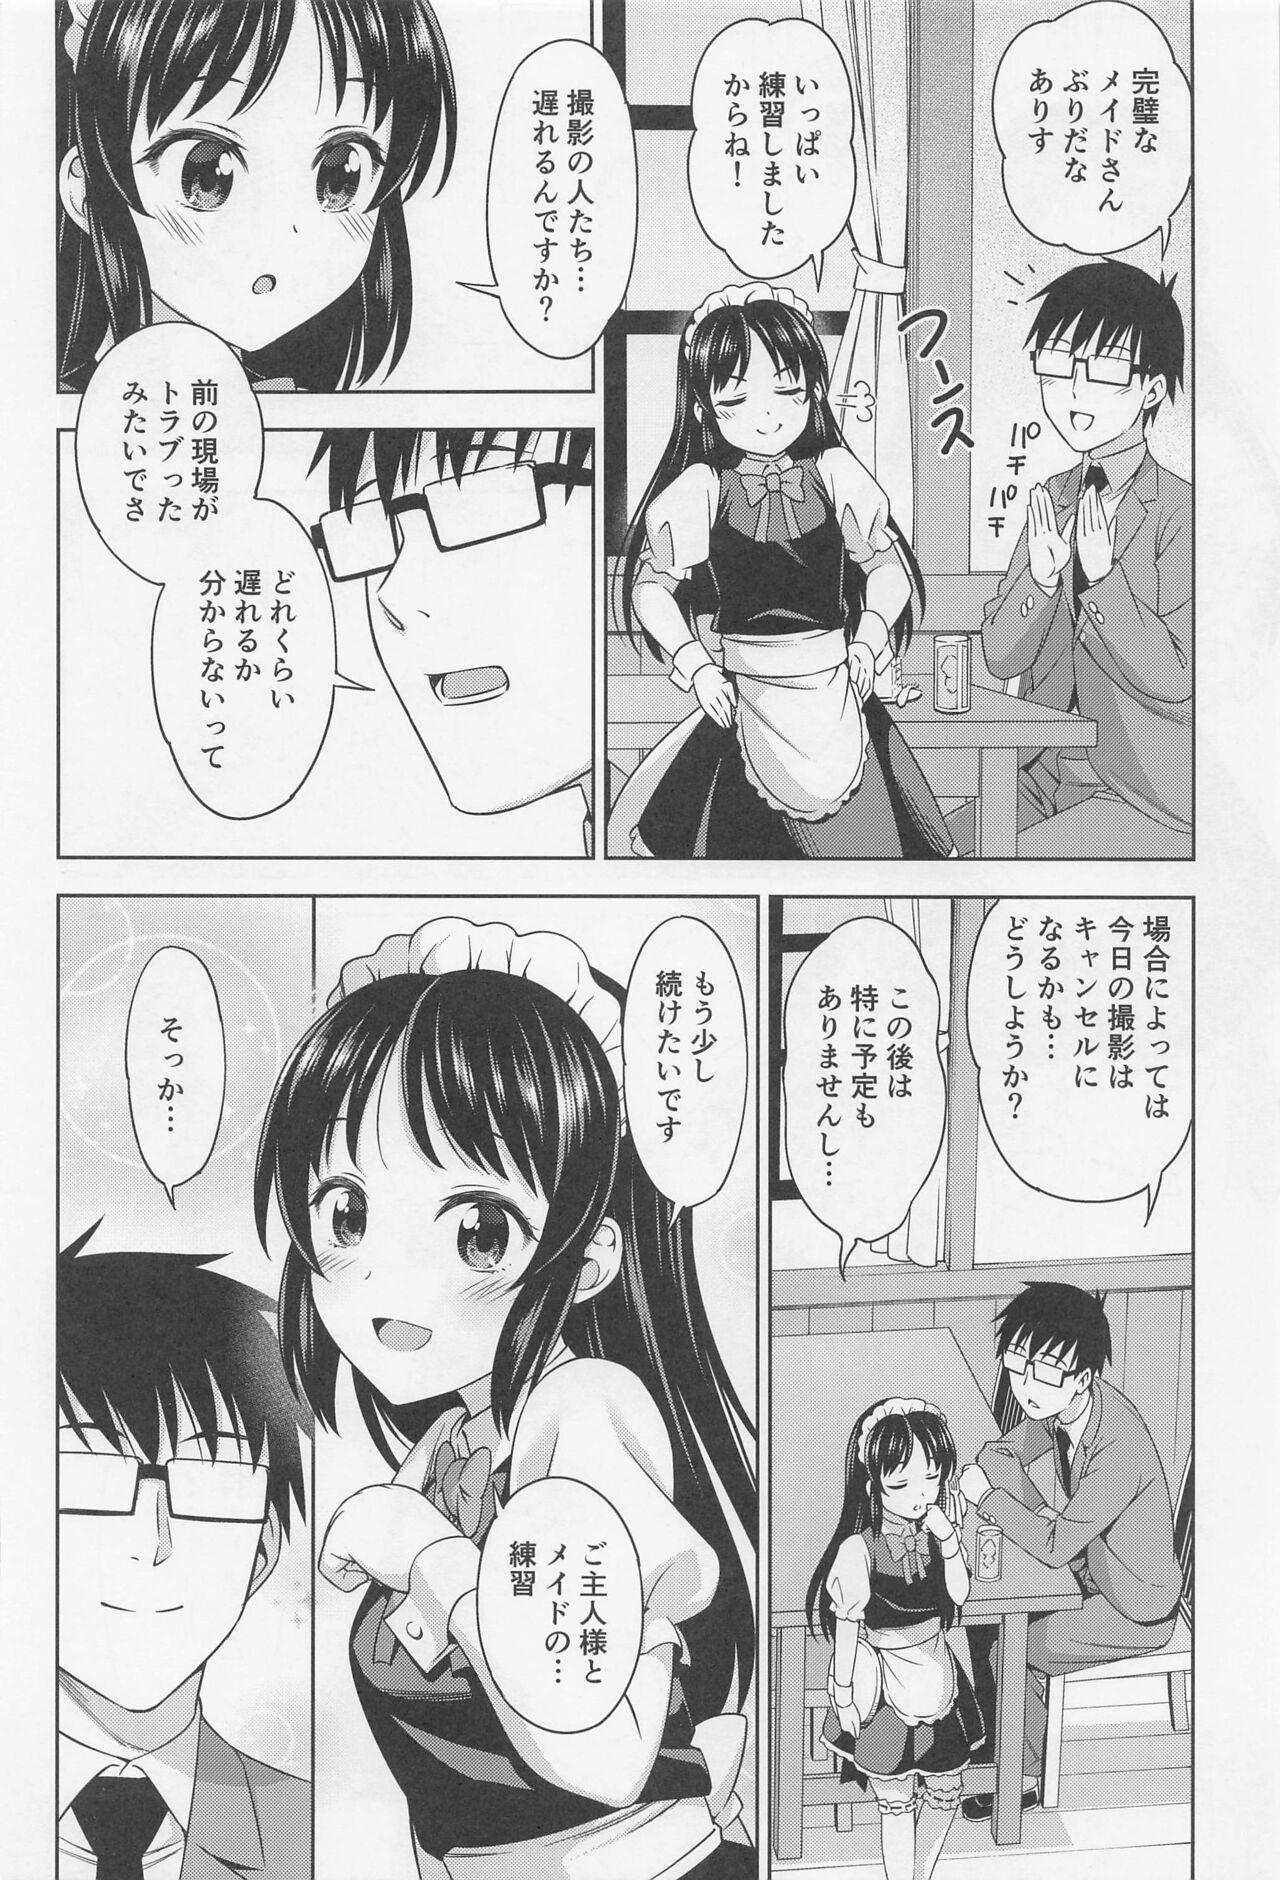 Stepsiblings Cafe Tachibana e Youkoso - welcome to cafe tatibana - The idolmaster Stretching - Page 3